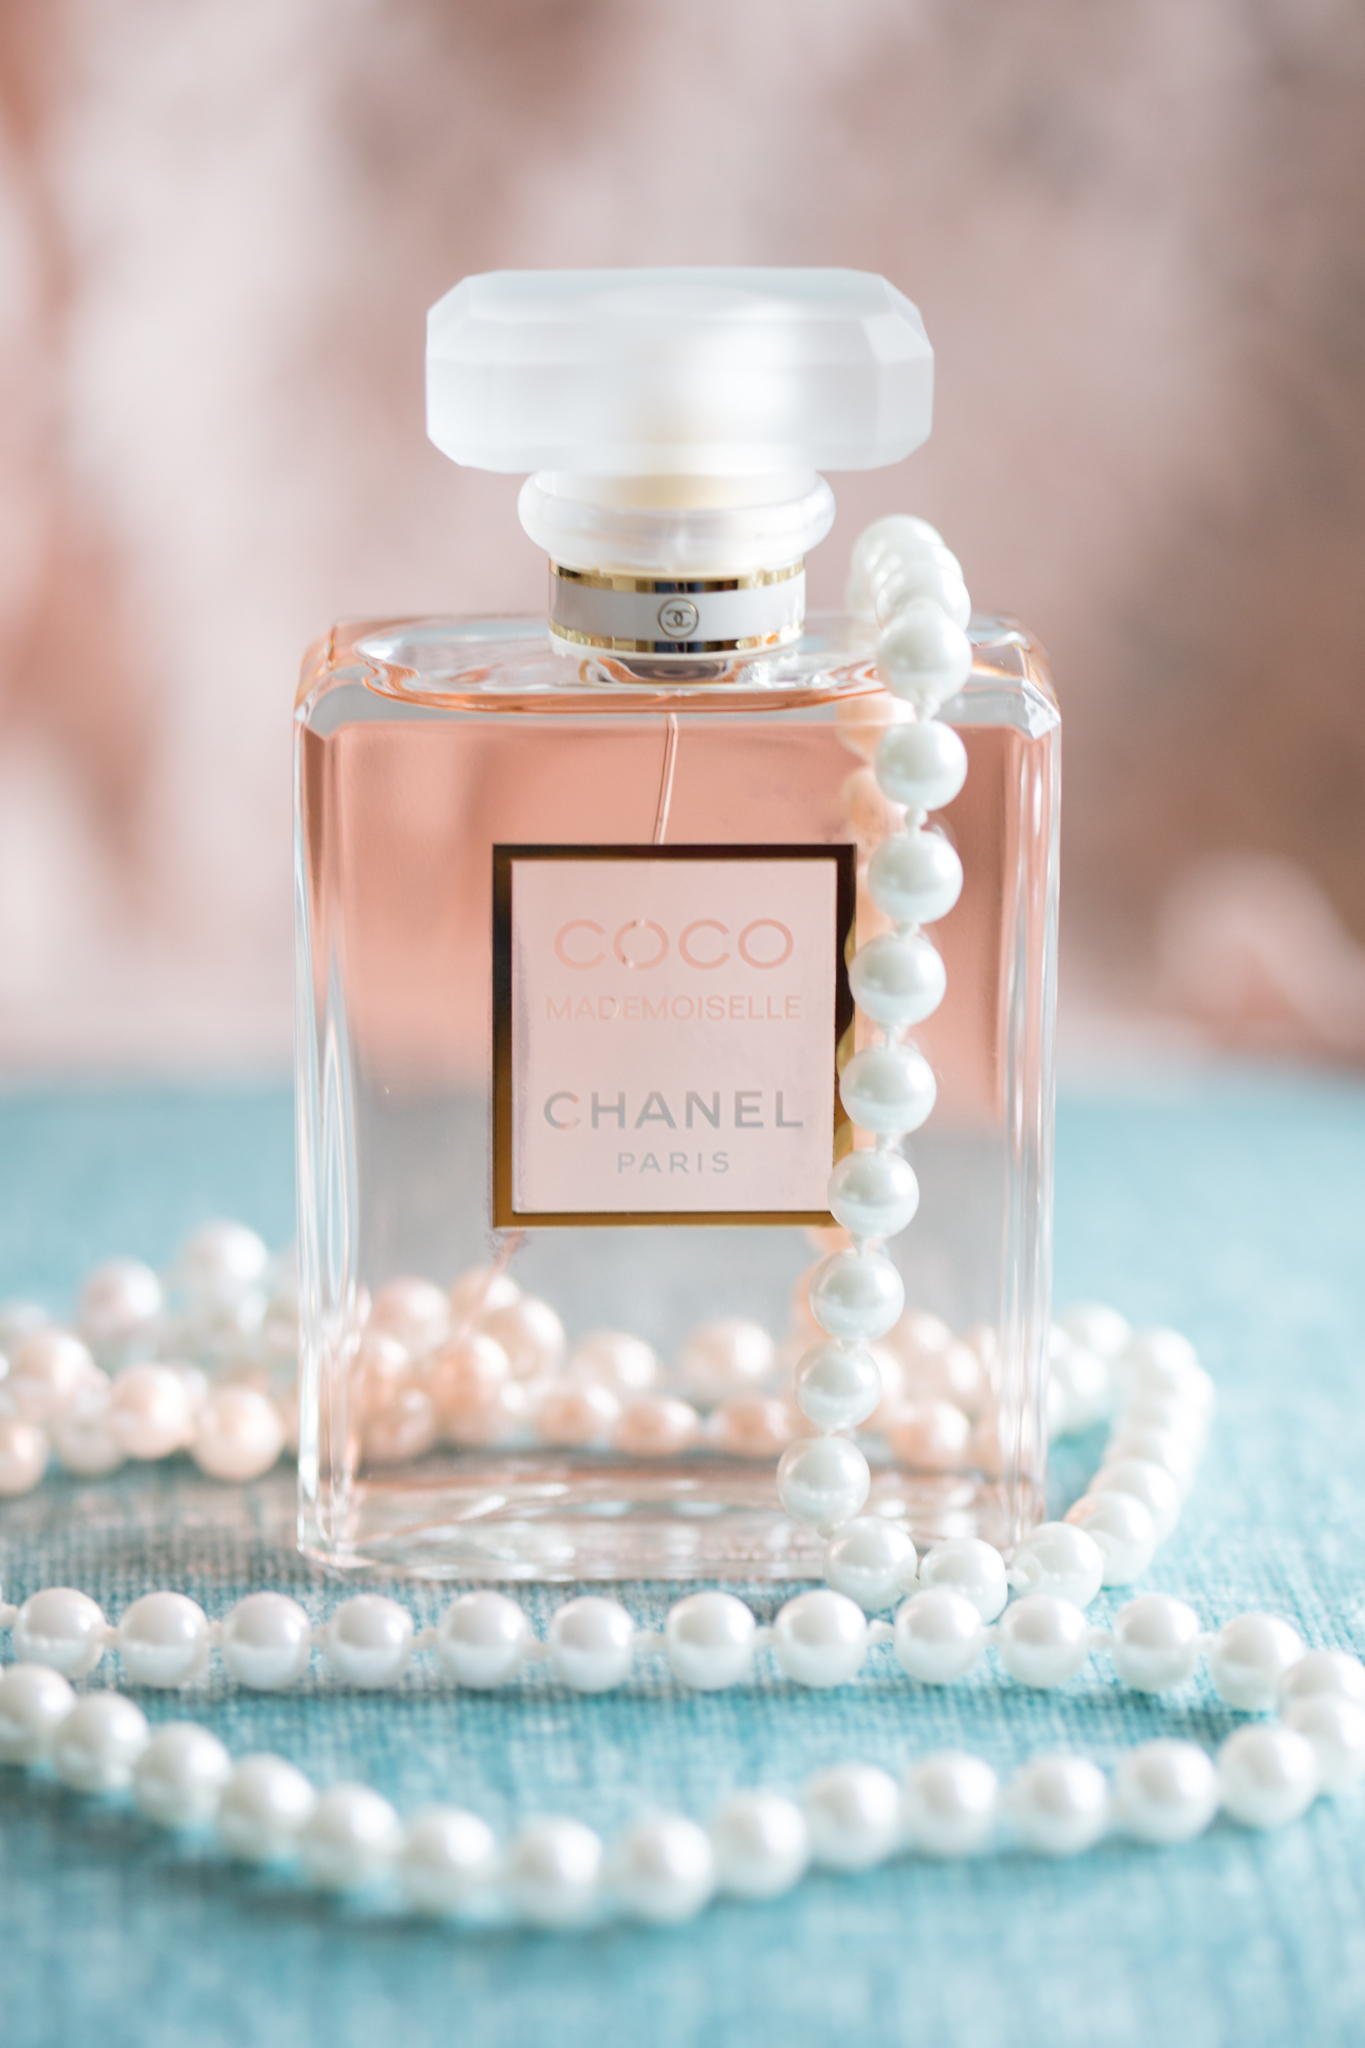 A Few of My Favorite Things  Chanel Coco Mademoiselle